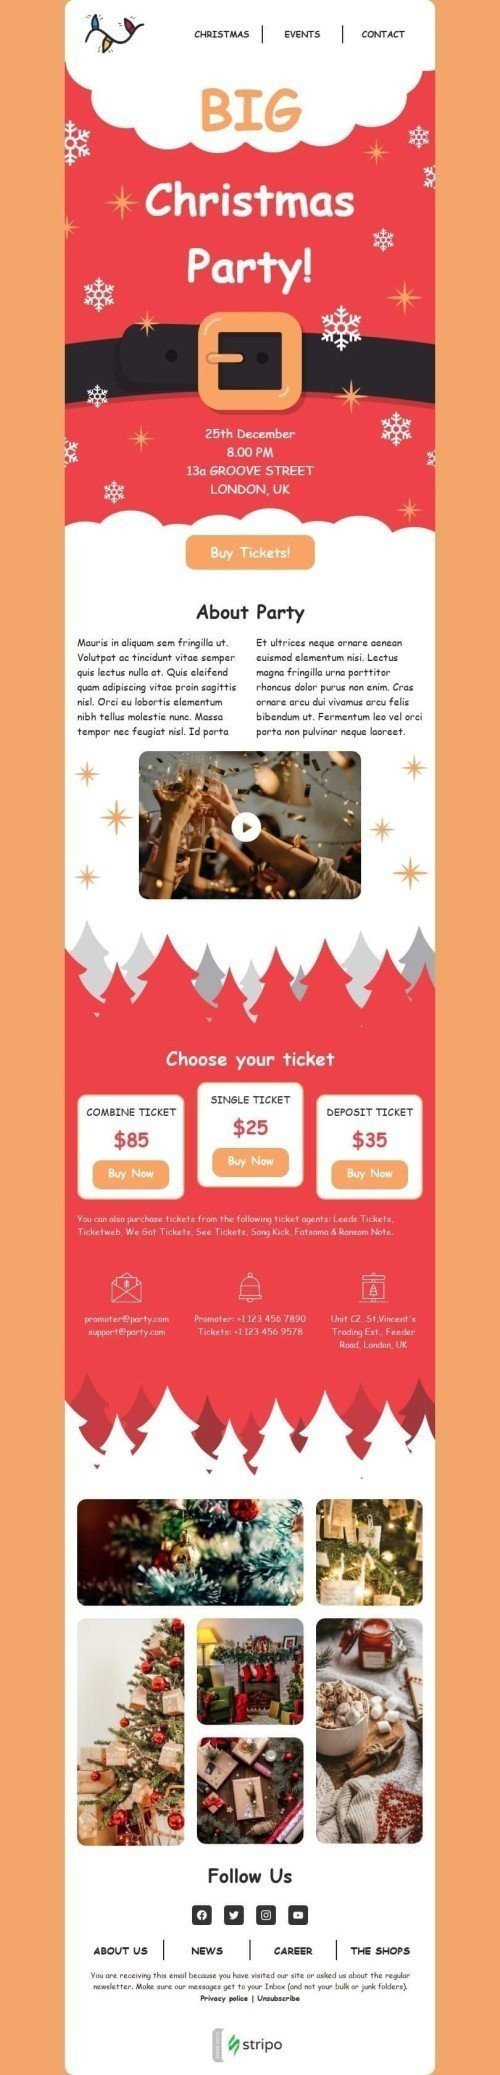 Christmas Email Template "Big Christmas Party" for Events industry desktop view